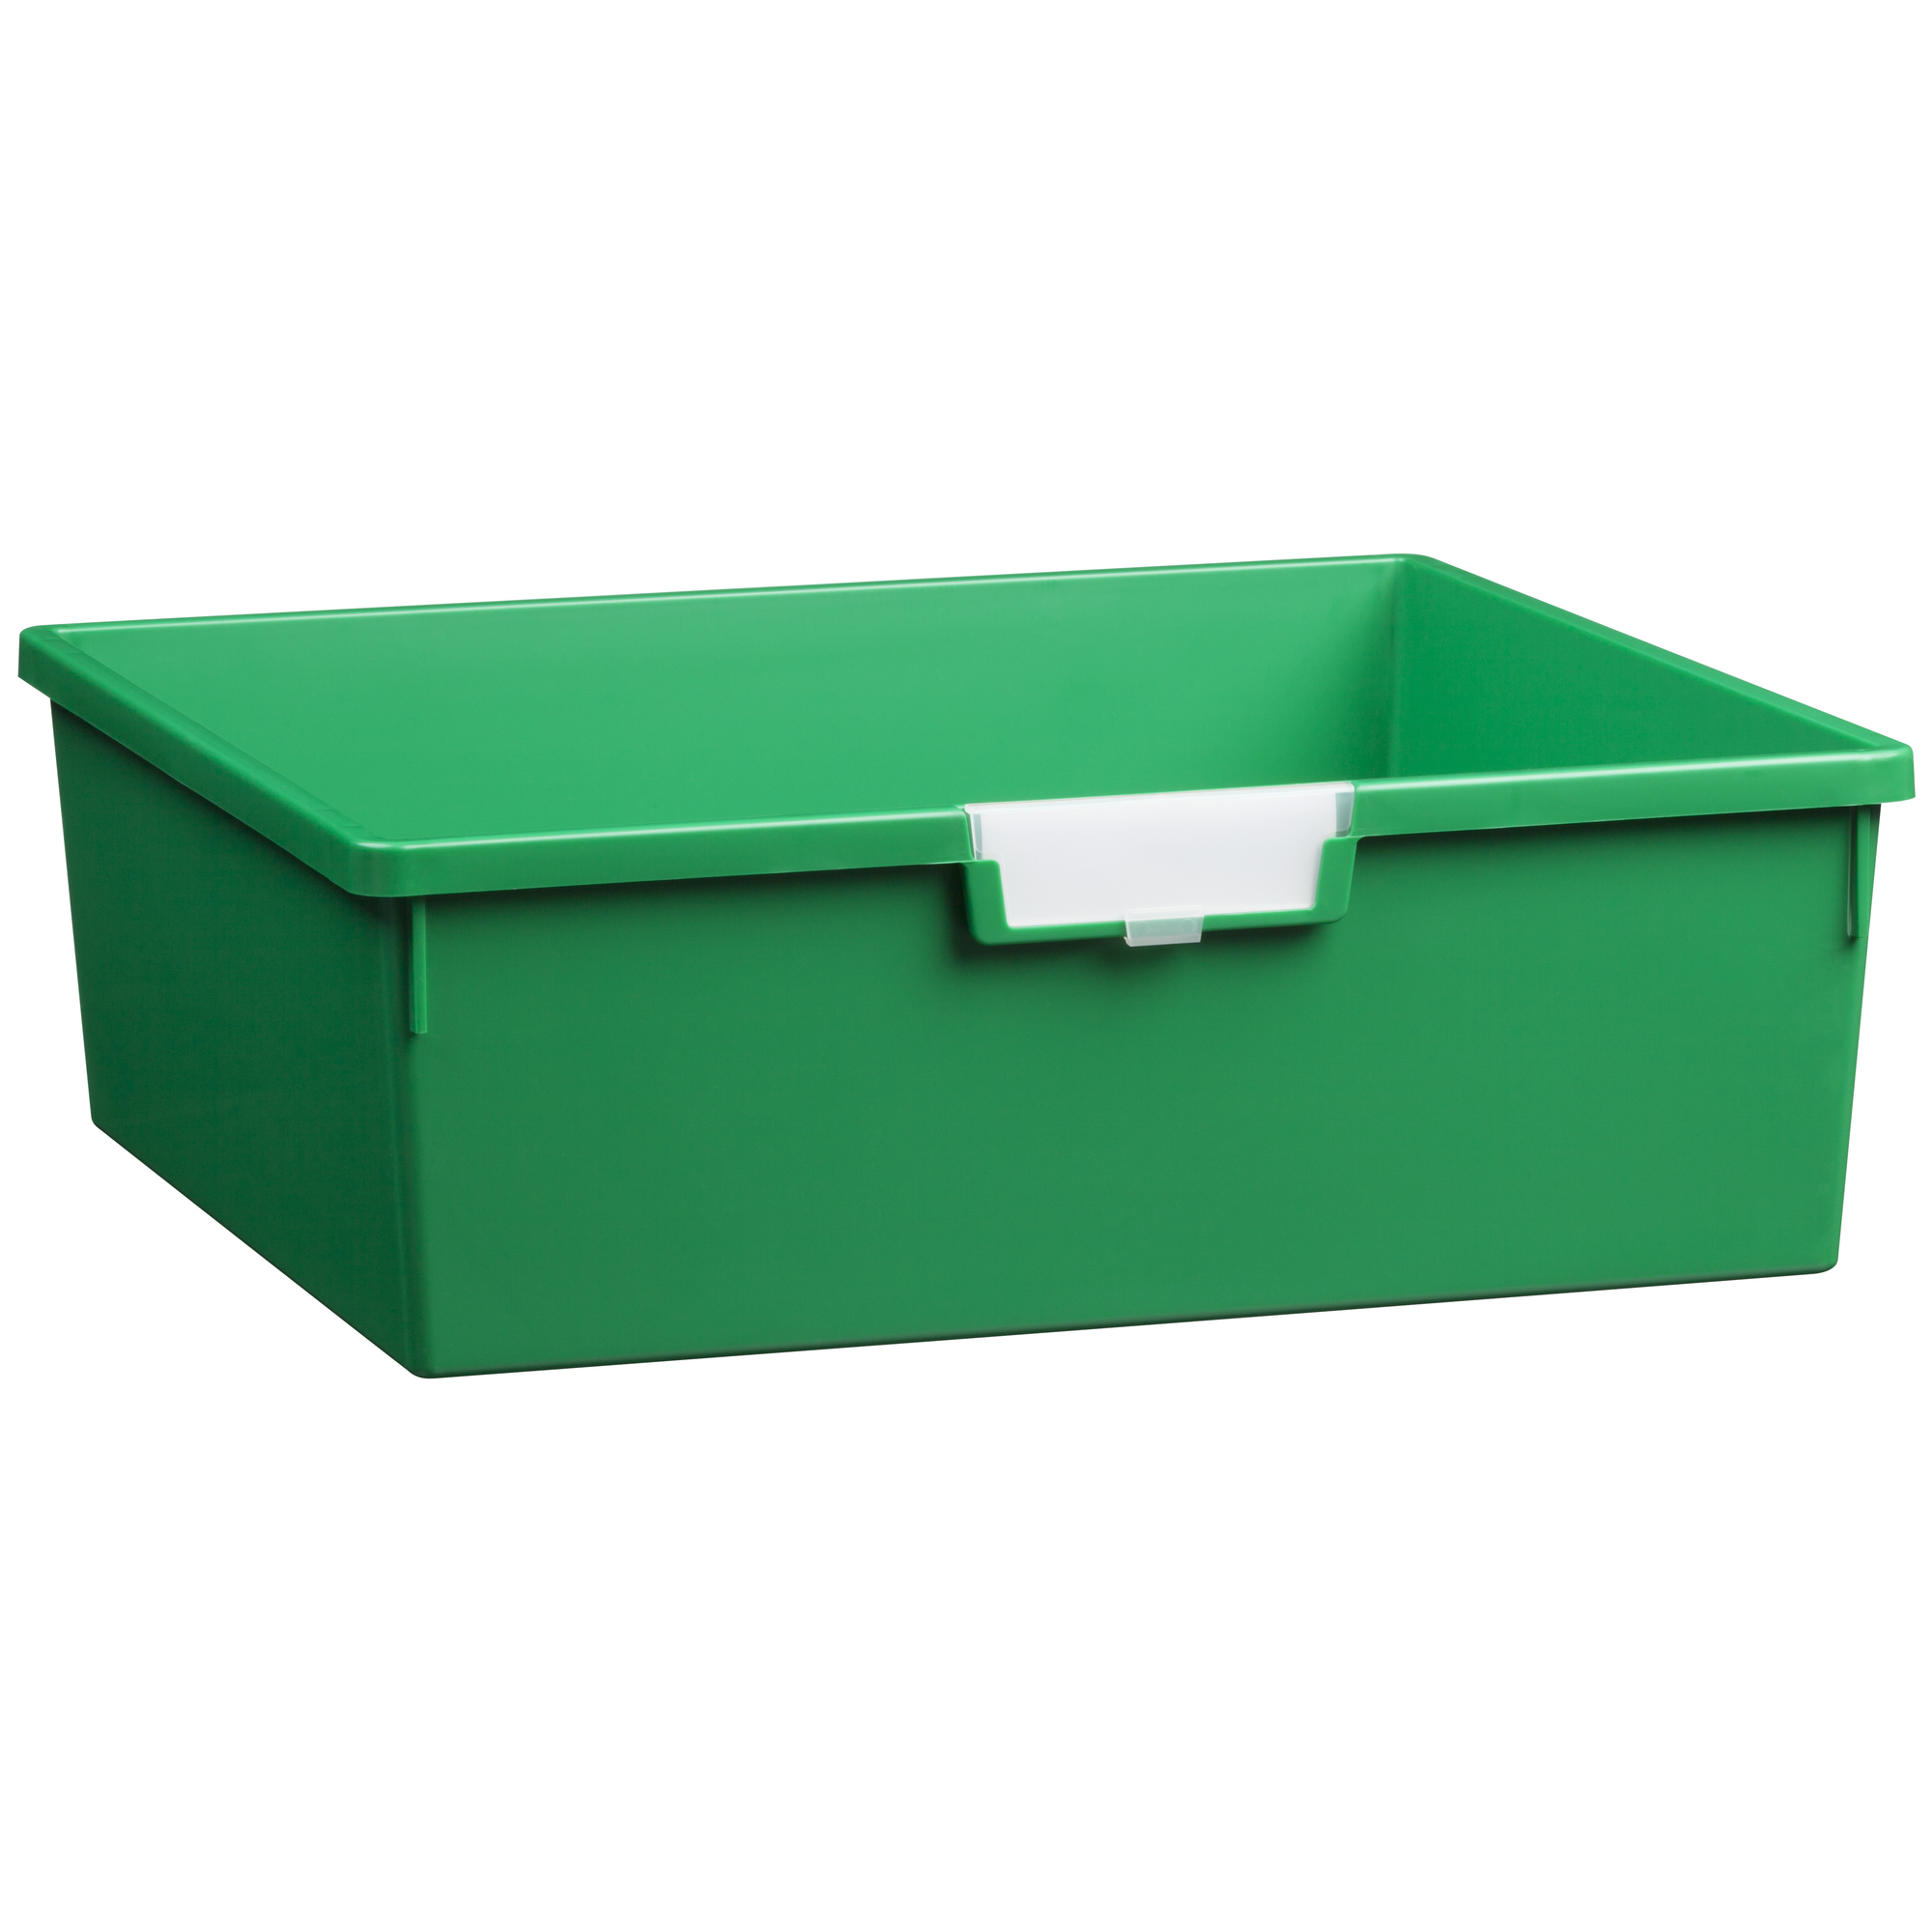 Certwood StorWerks, Wide Line 6Inch Tray in Primary Green-3PK, Included (qty.) 3, Material Plastic, Height 6 in, Model CE1958PG3